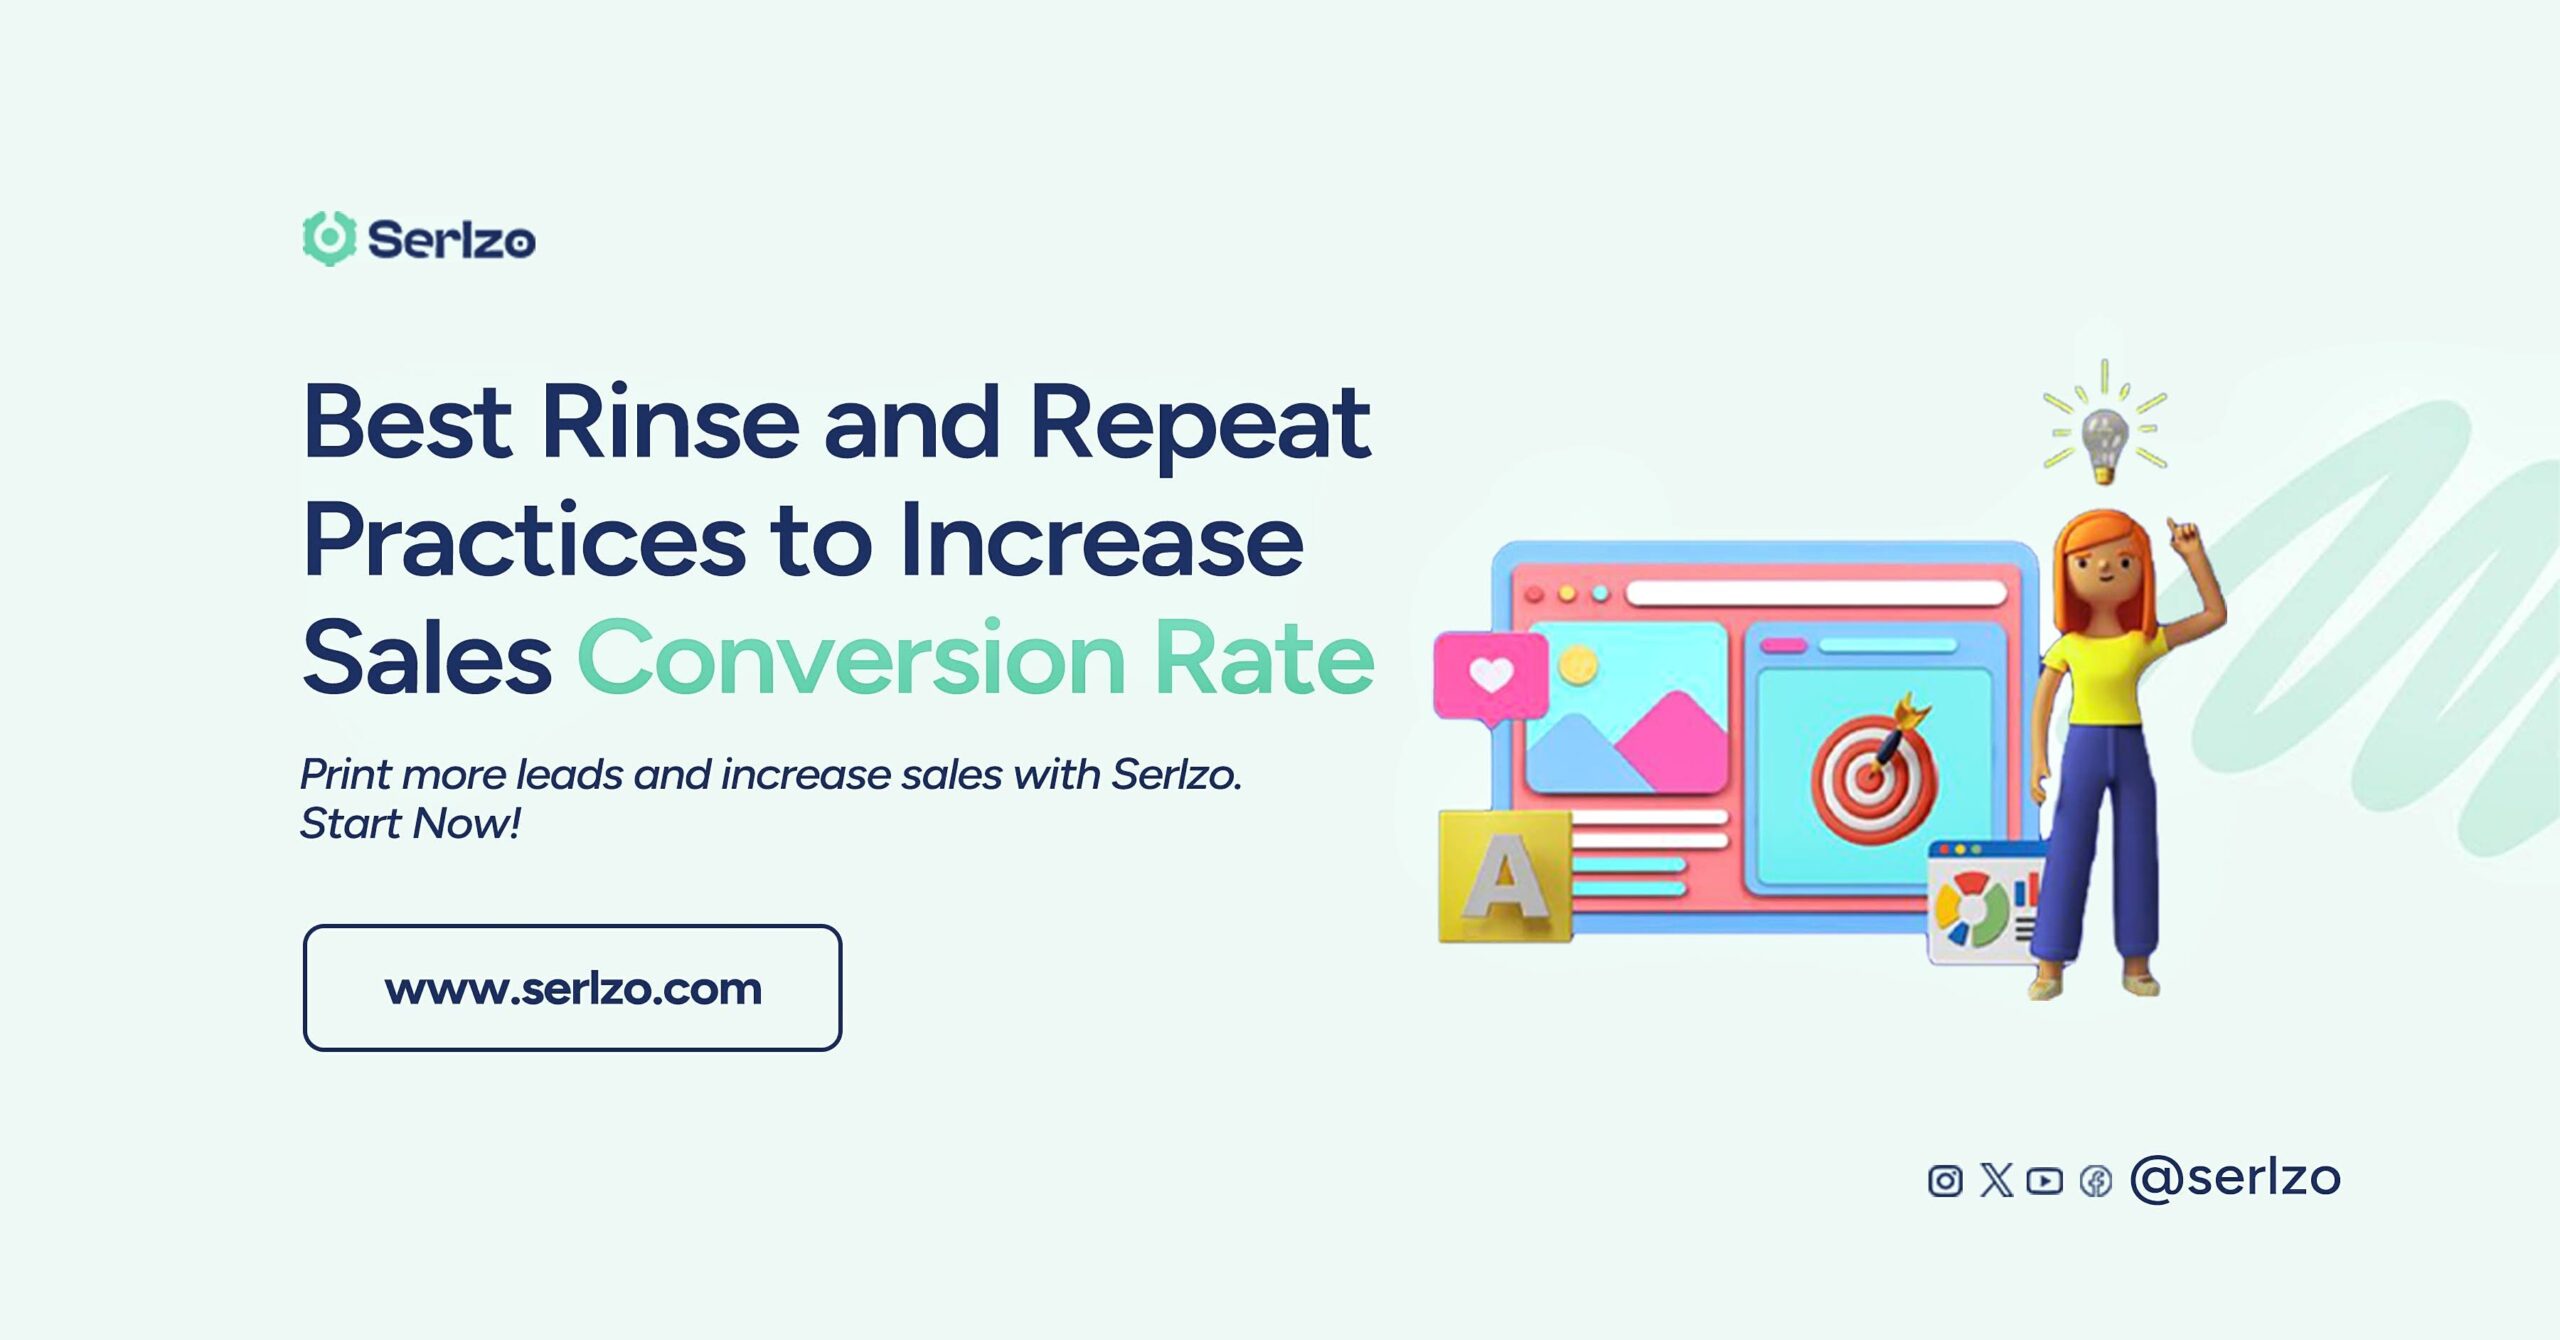 Best Rinse and Repeat Practices to Increase Sales Conversion Rate